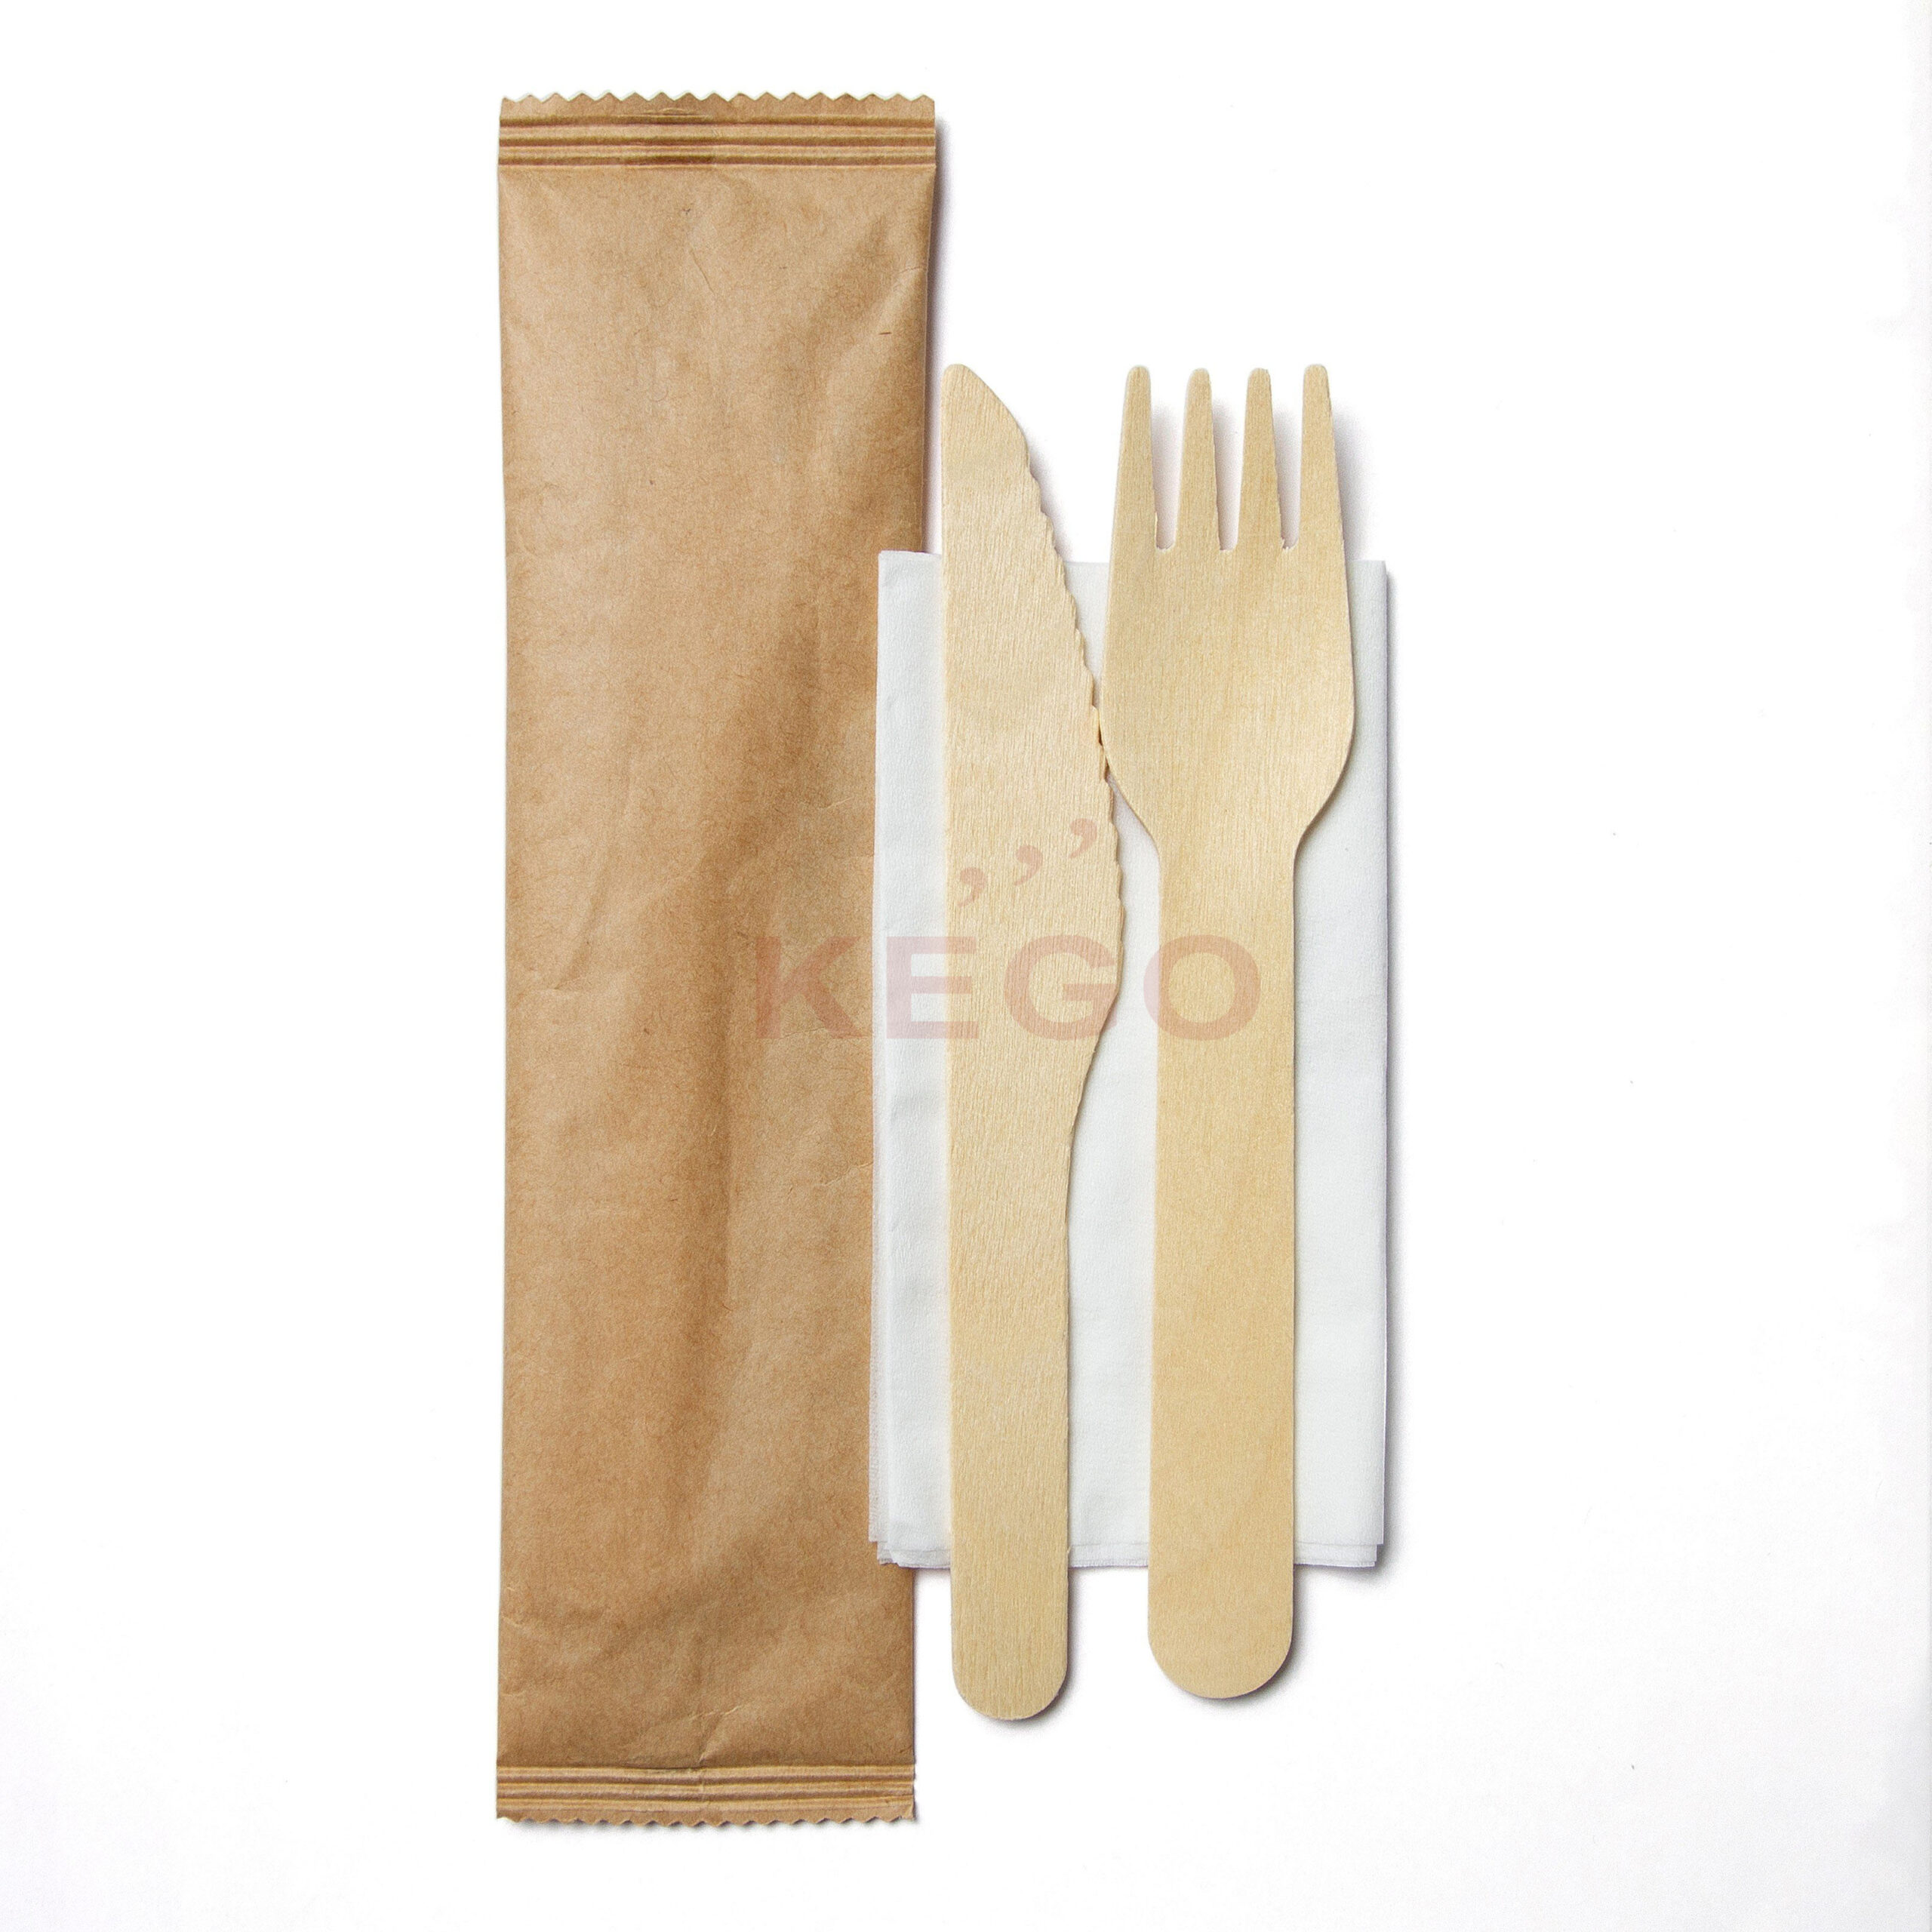 https://disposablewoodencutlery.com/wp-content/uploads/2015/09/Mix-Set-With-Napkin-5-1-scaled.jpg